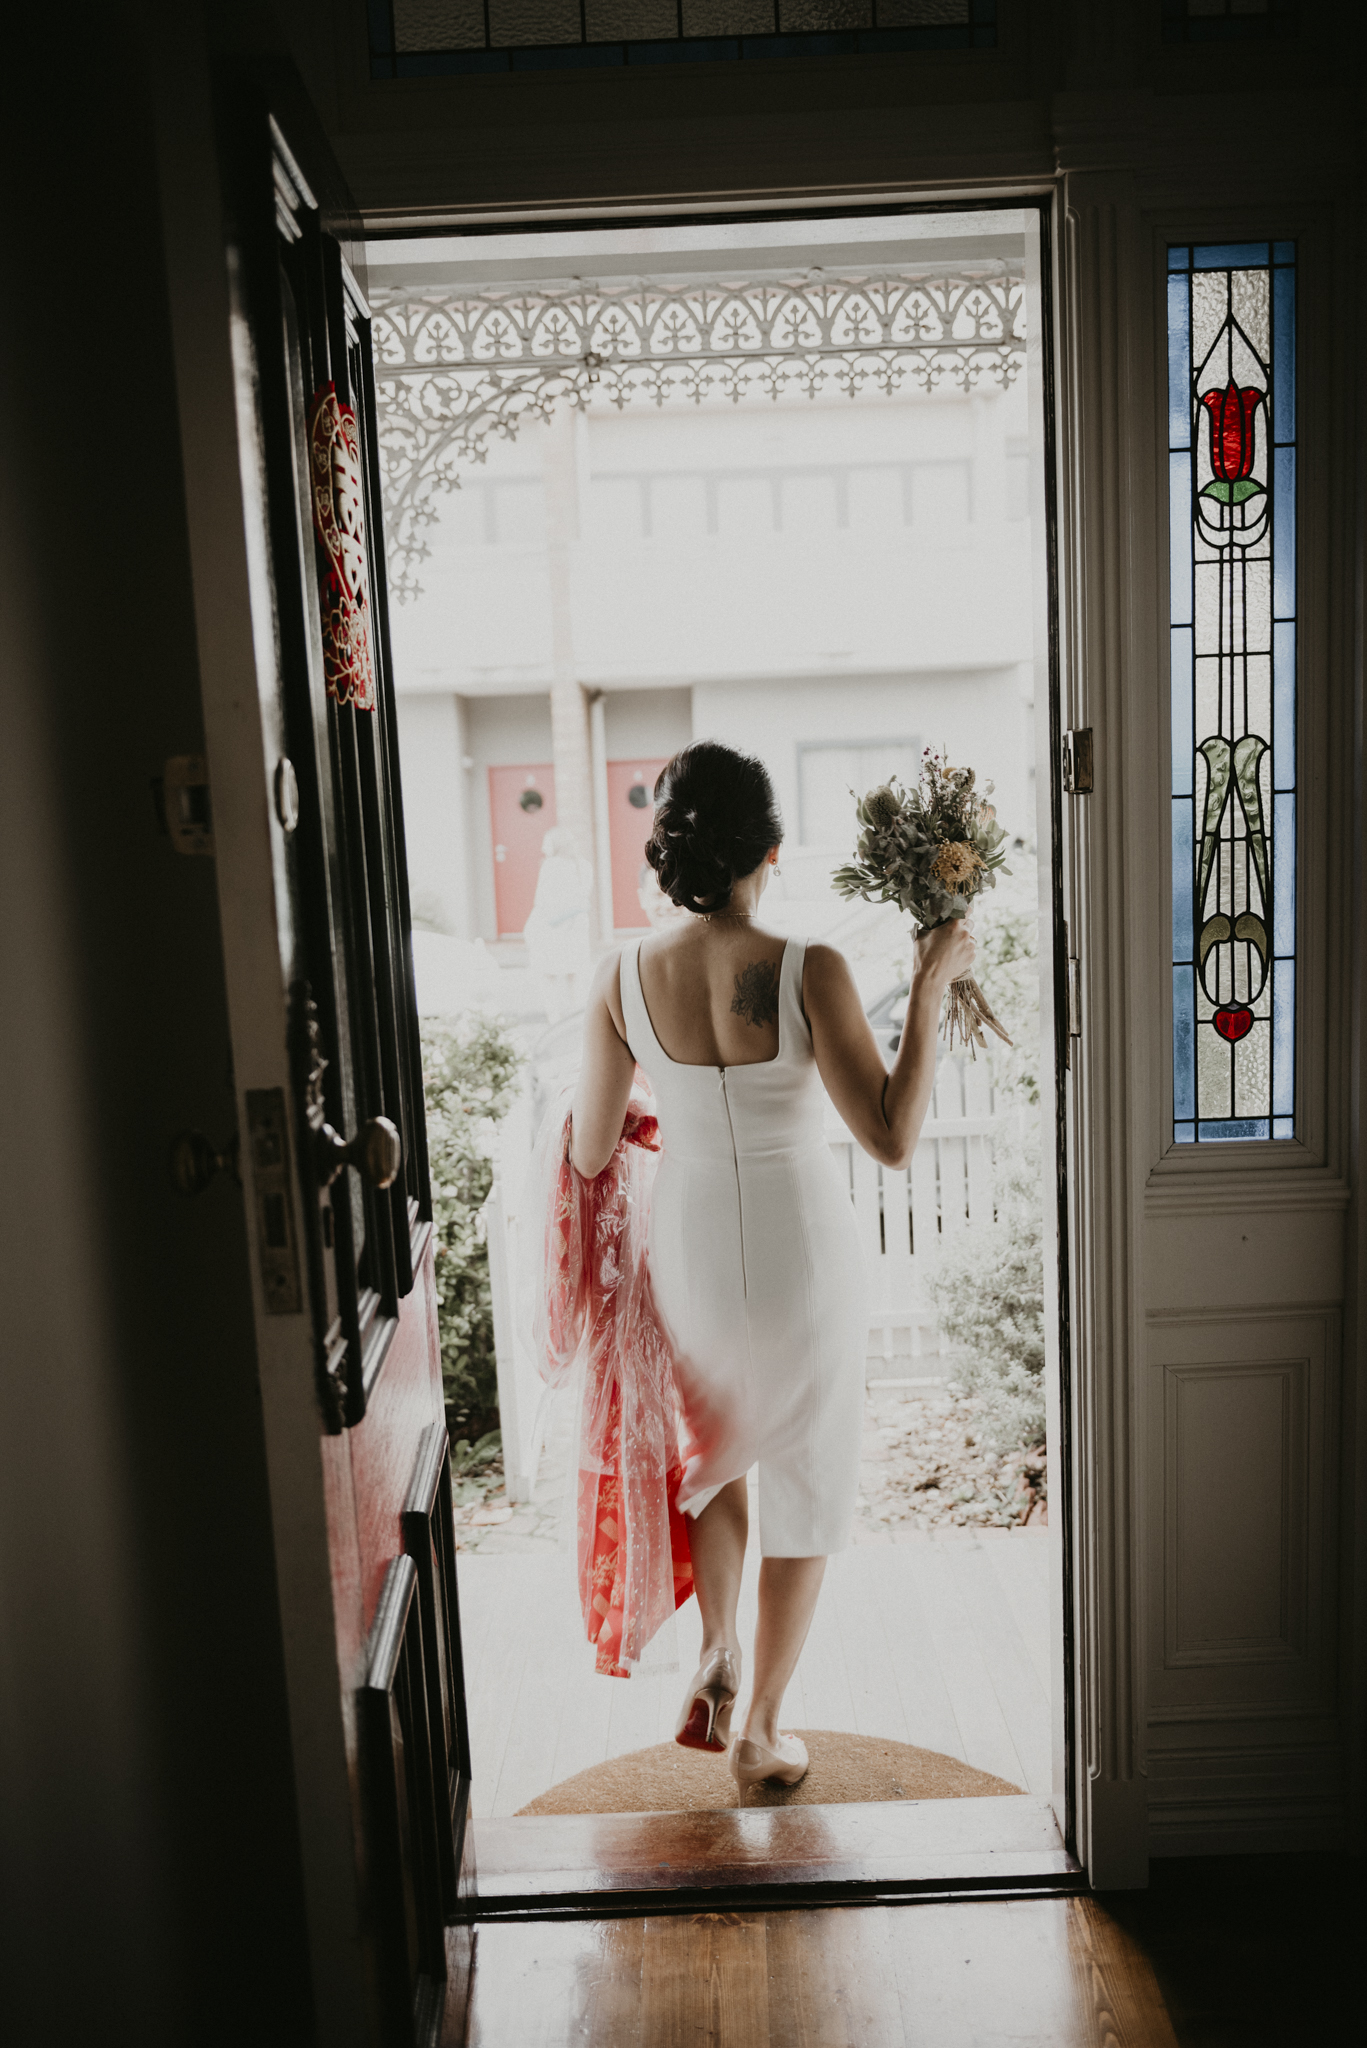 agnes-duy-15th-december-2018-chinese-vietnamese-wedding-tea-ceremony-yarraville-home-house-documentary-candid-photographer-sarah-matler-photography-91